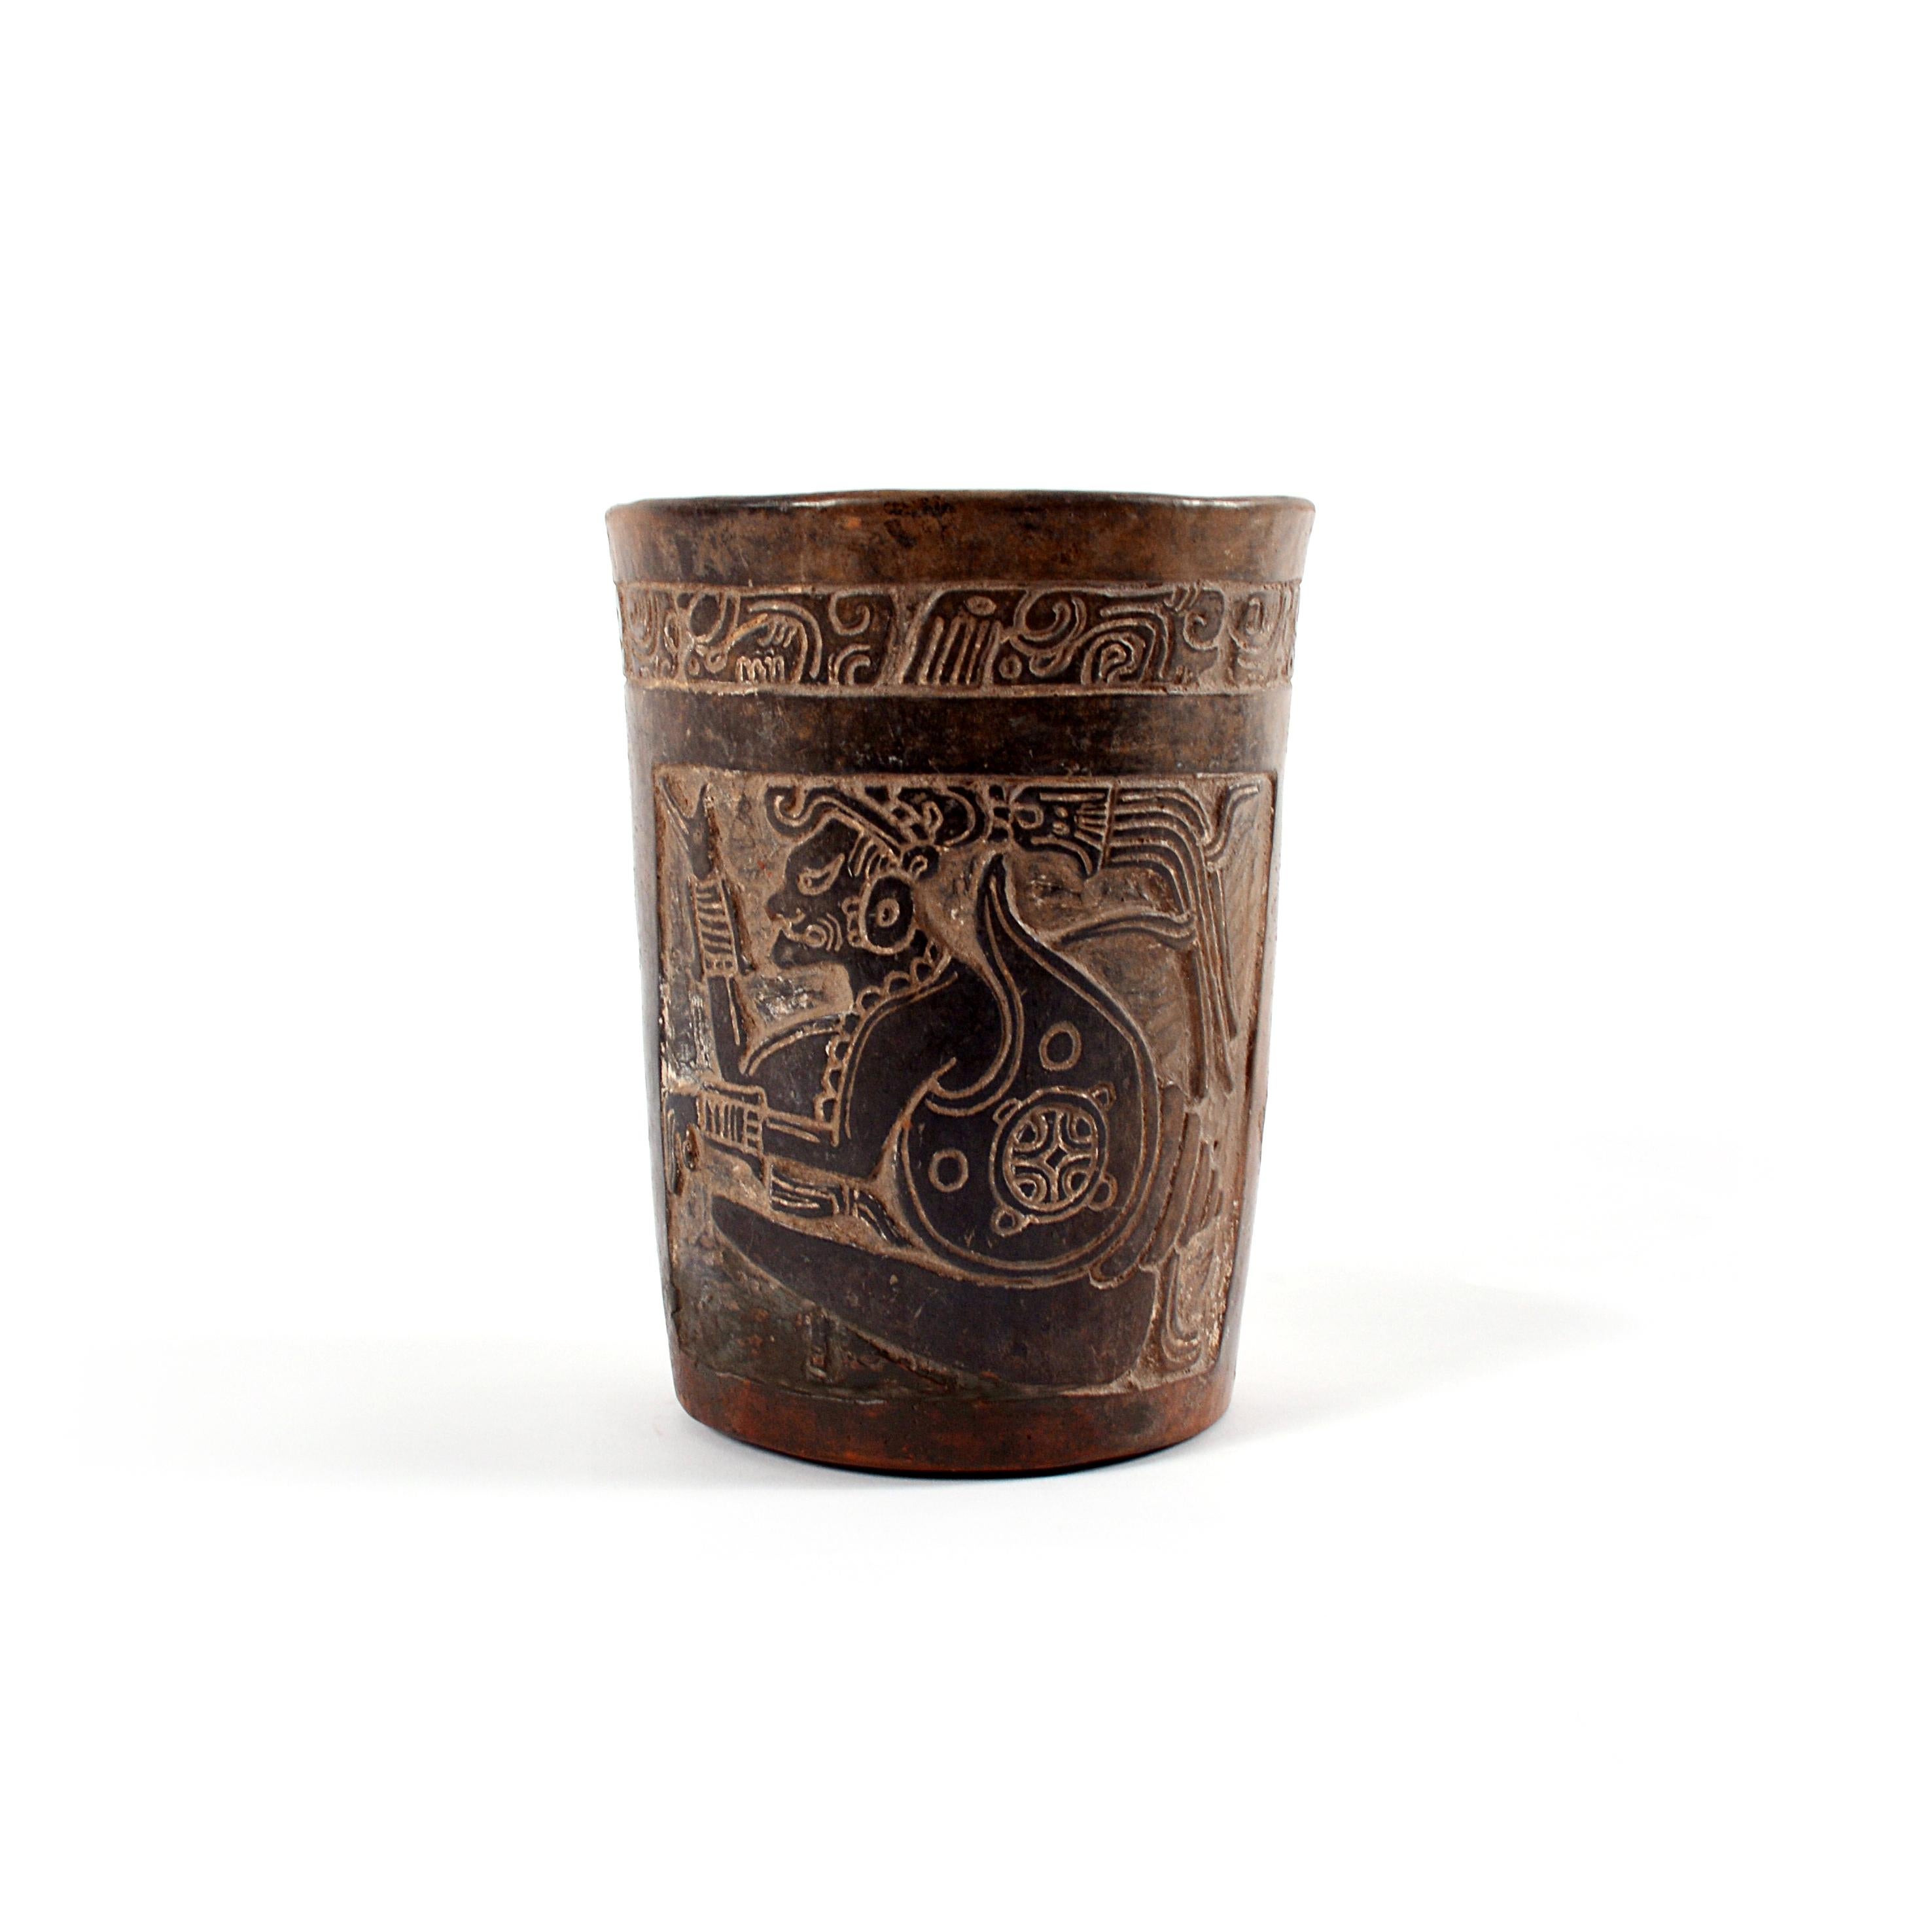 High Mayan brown ware vessel carved on two sides with the seated and gesturing figure of a dignitary within frame. A band of glyphs encircles the rim. From the Late Classic Period (ca. 550 – 950 AD).

With TL-analysis from Laboratory Ralf Kotala,